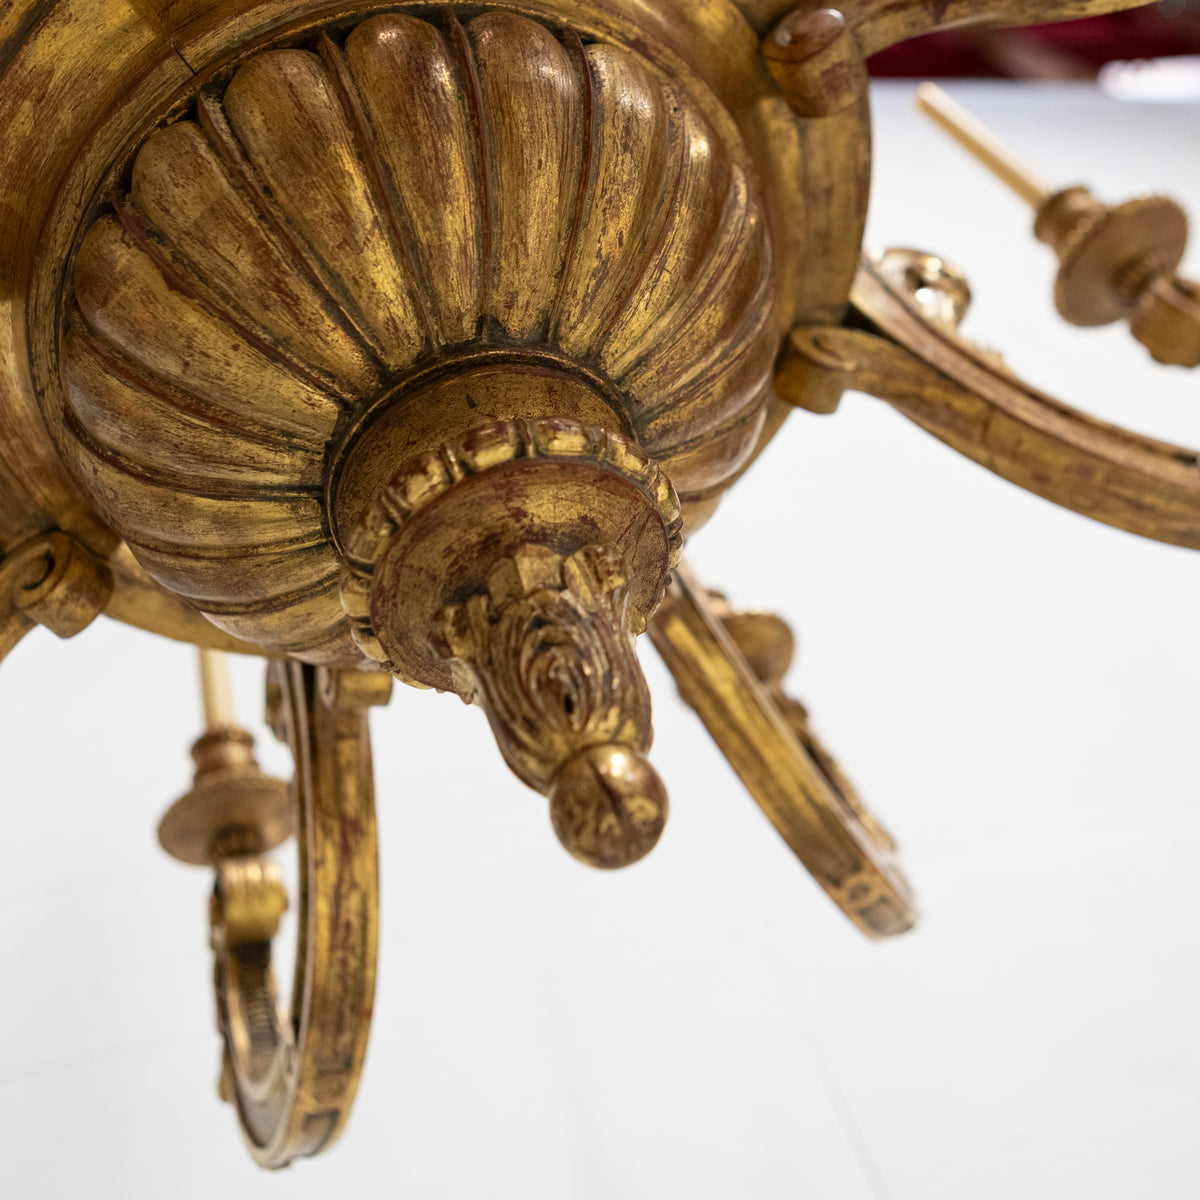 Large Antique Italian Giltwood 19th Century 8 Arm Chandelier | The Architectural Forum